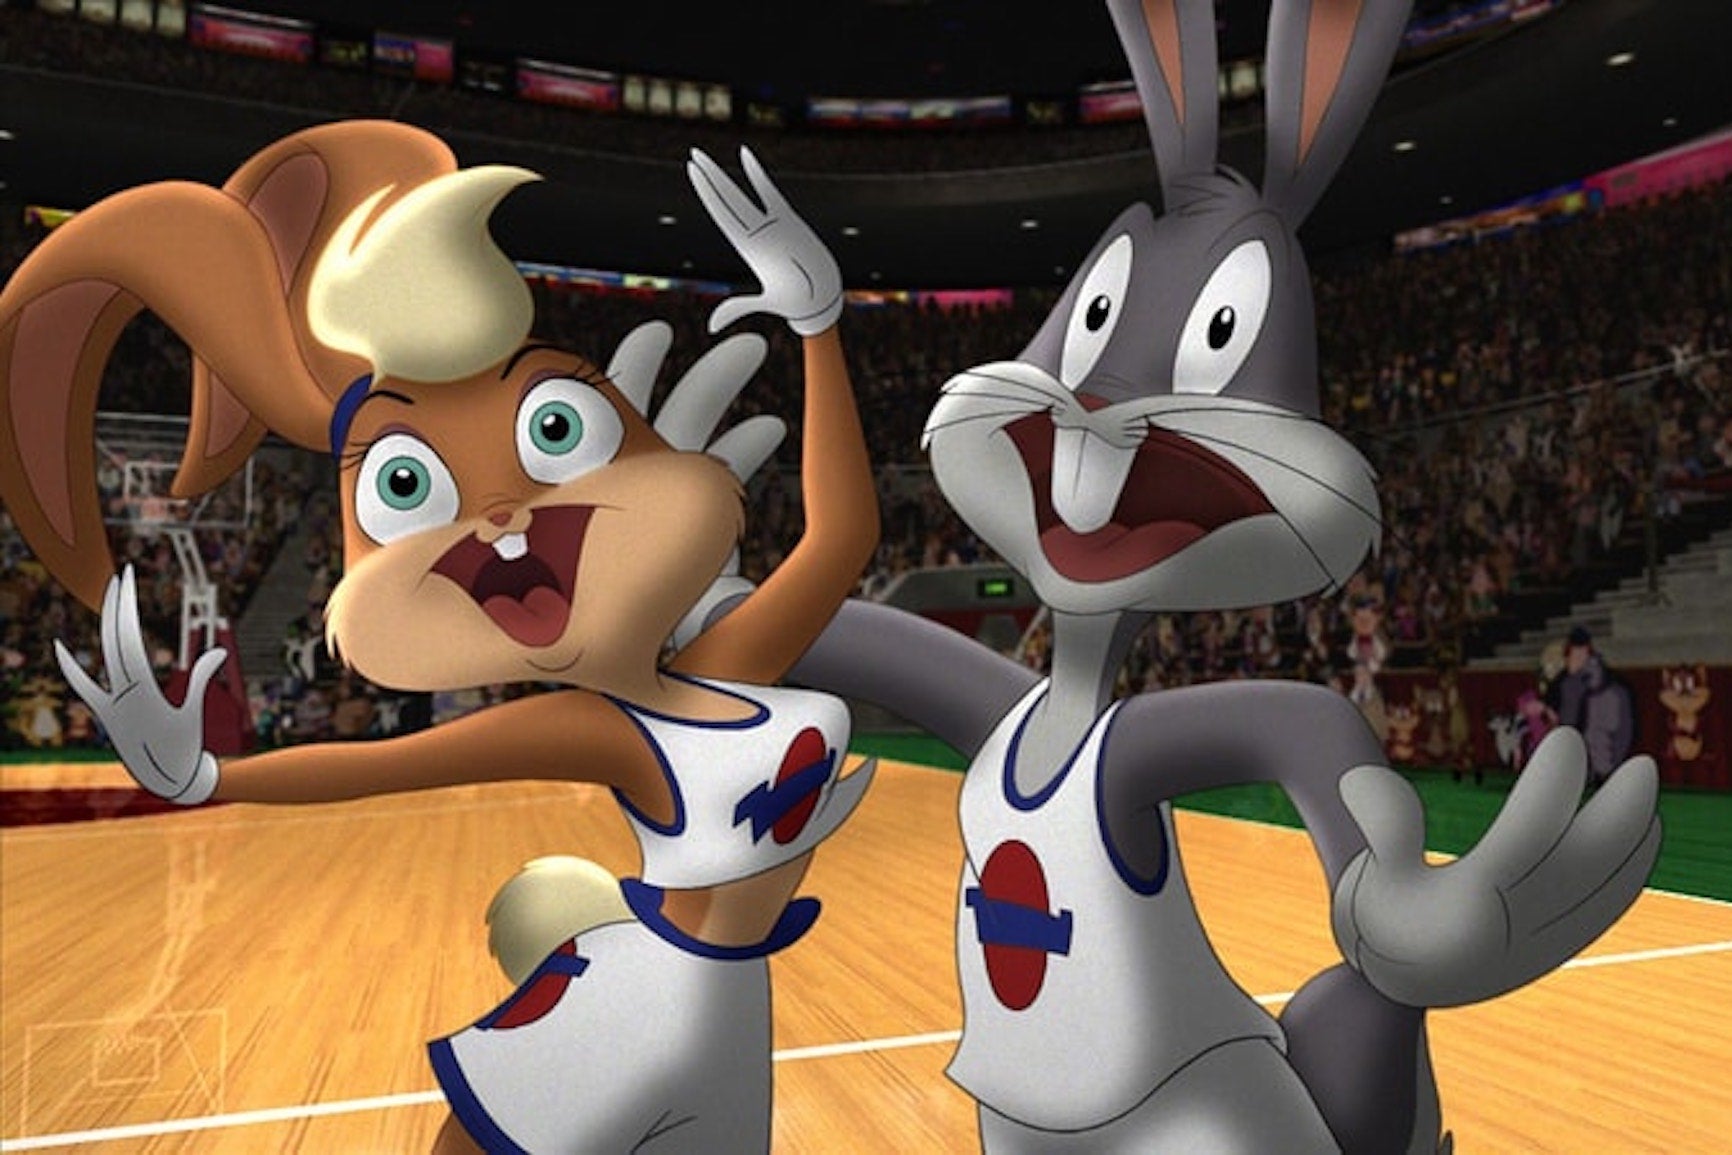 Space Jam 2s Lola Bunny Pepé Le Pew The Sexy Cartoon Character Wont